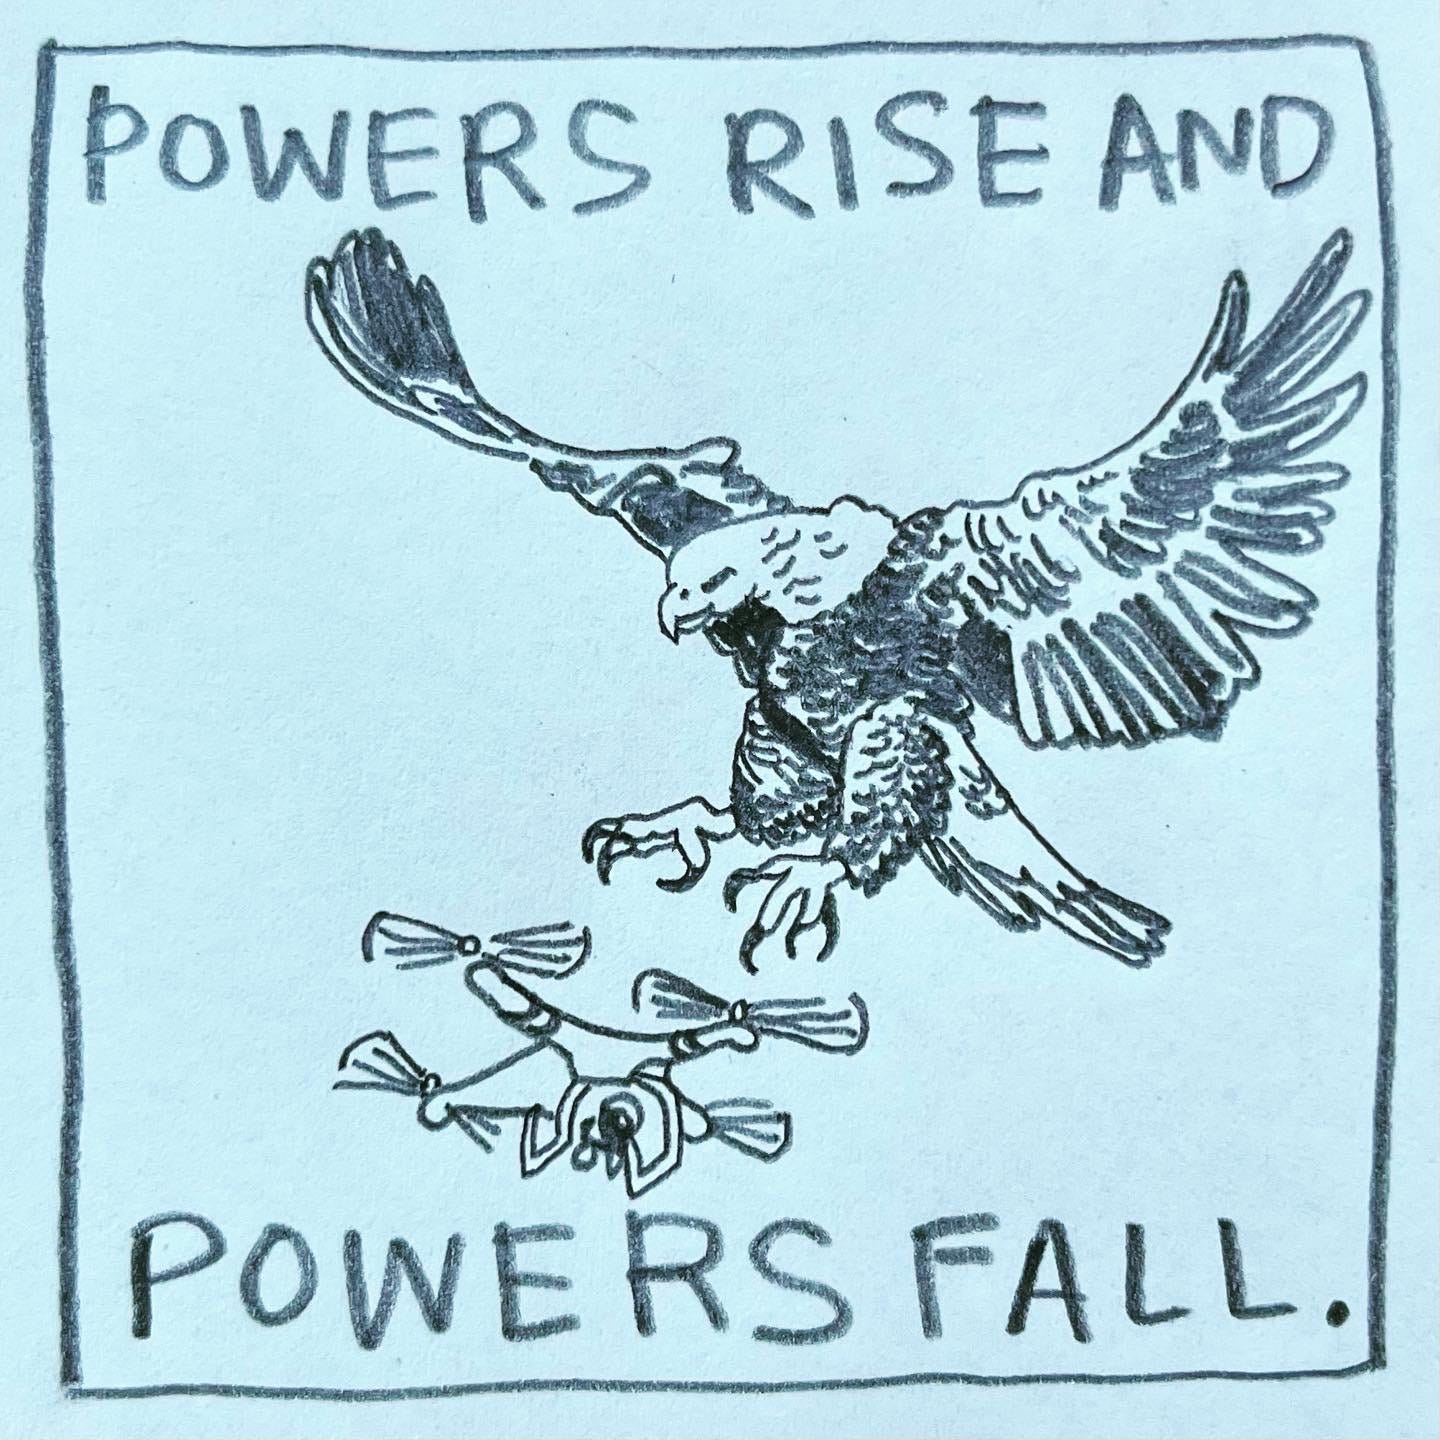 Panel 5: Powers rise and powers fall. Image: A bald eagle swoops down, talons out, about to take down a smaller flying drone